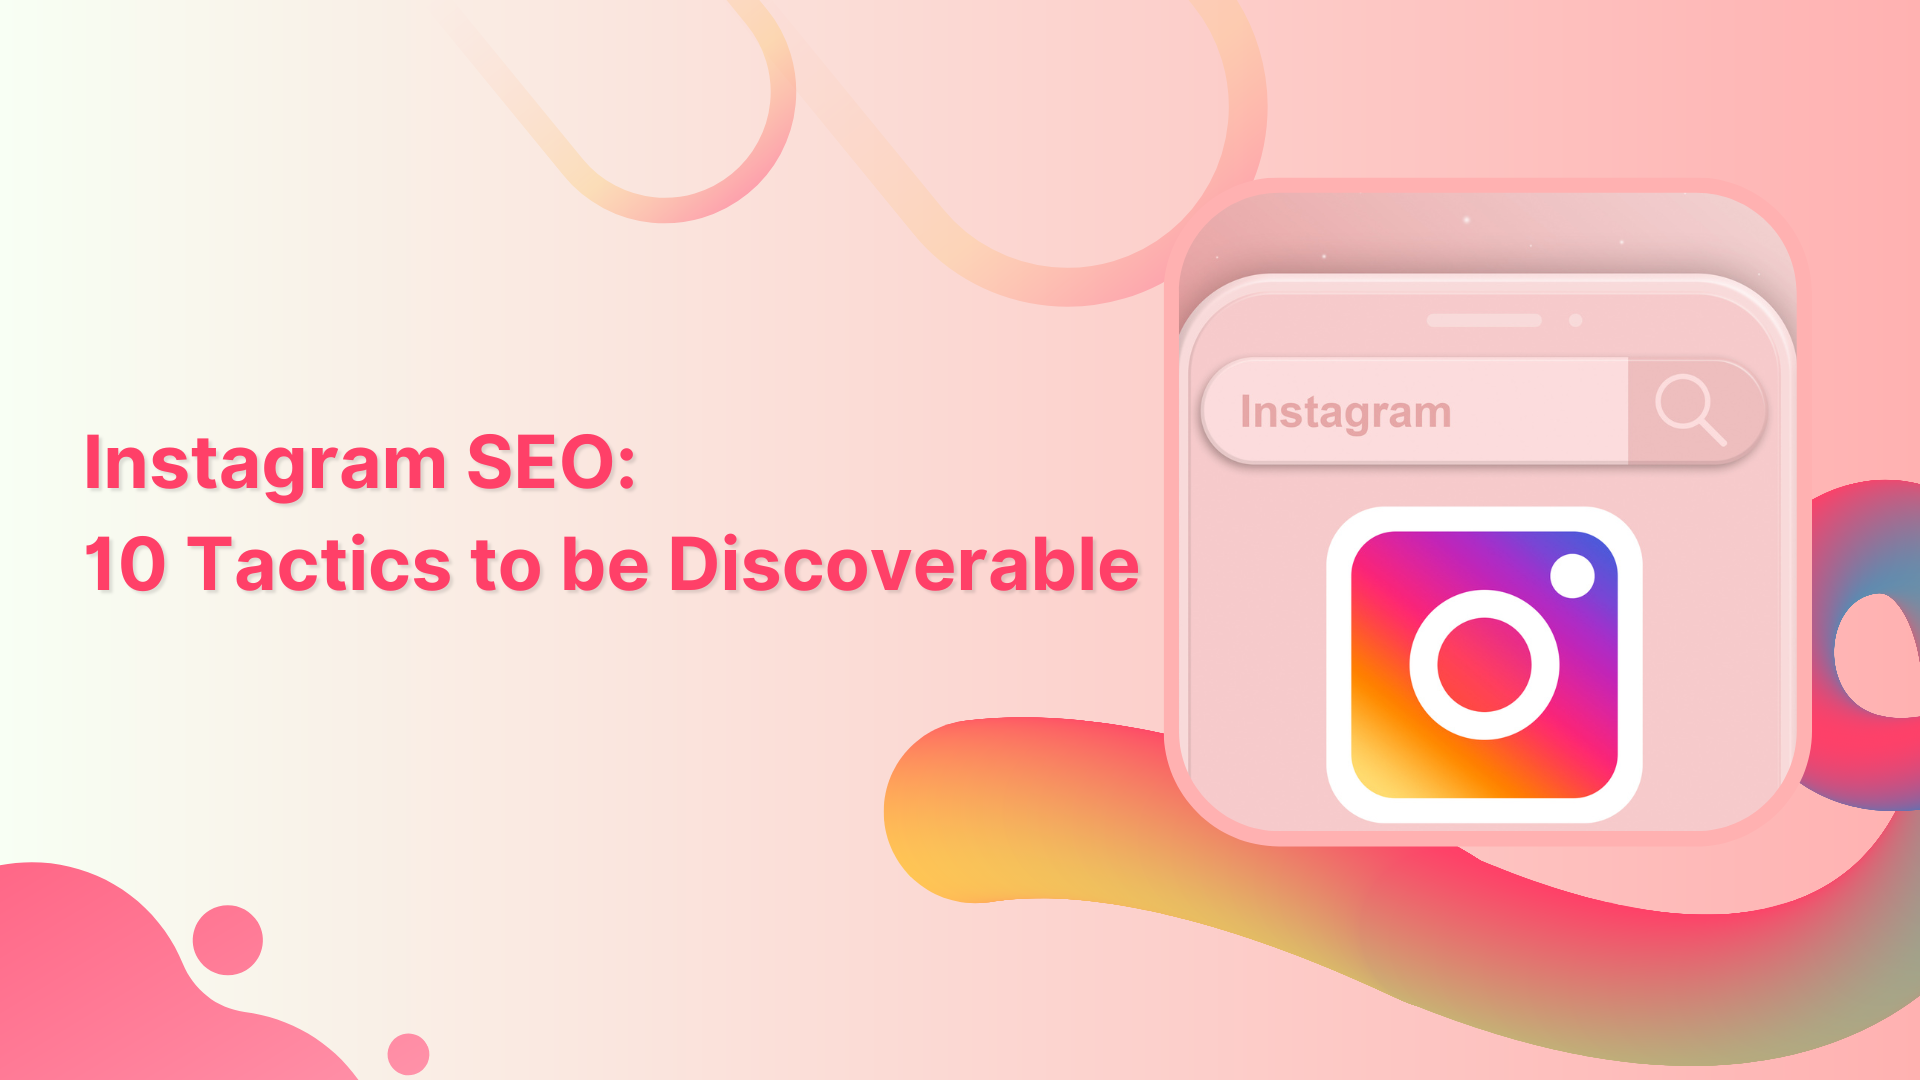 Instagram SEO: 10 Tactics to Be Discoverable on the App